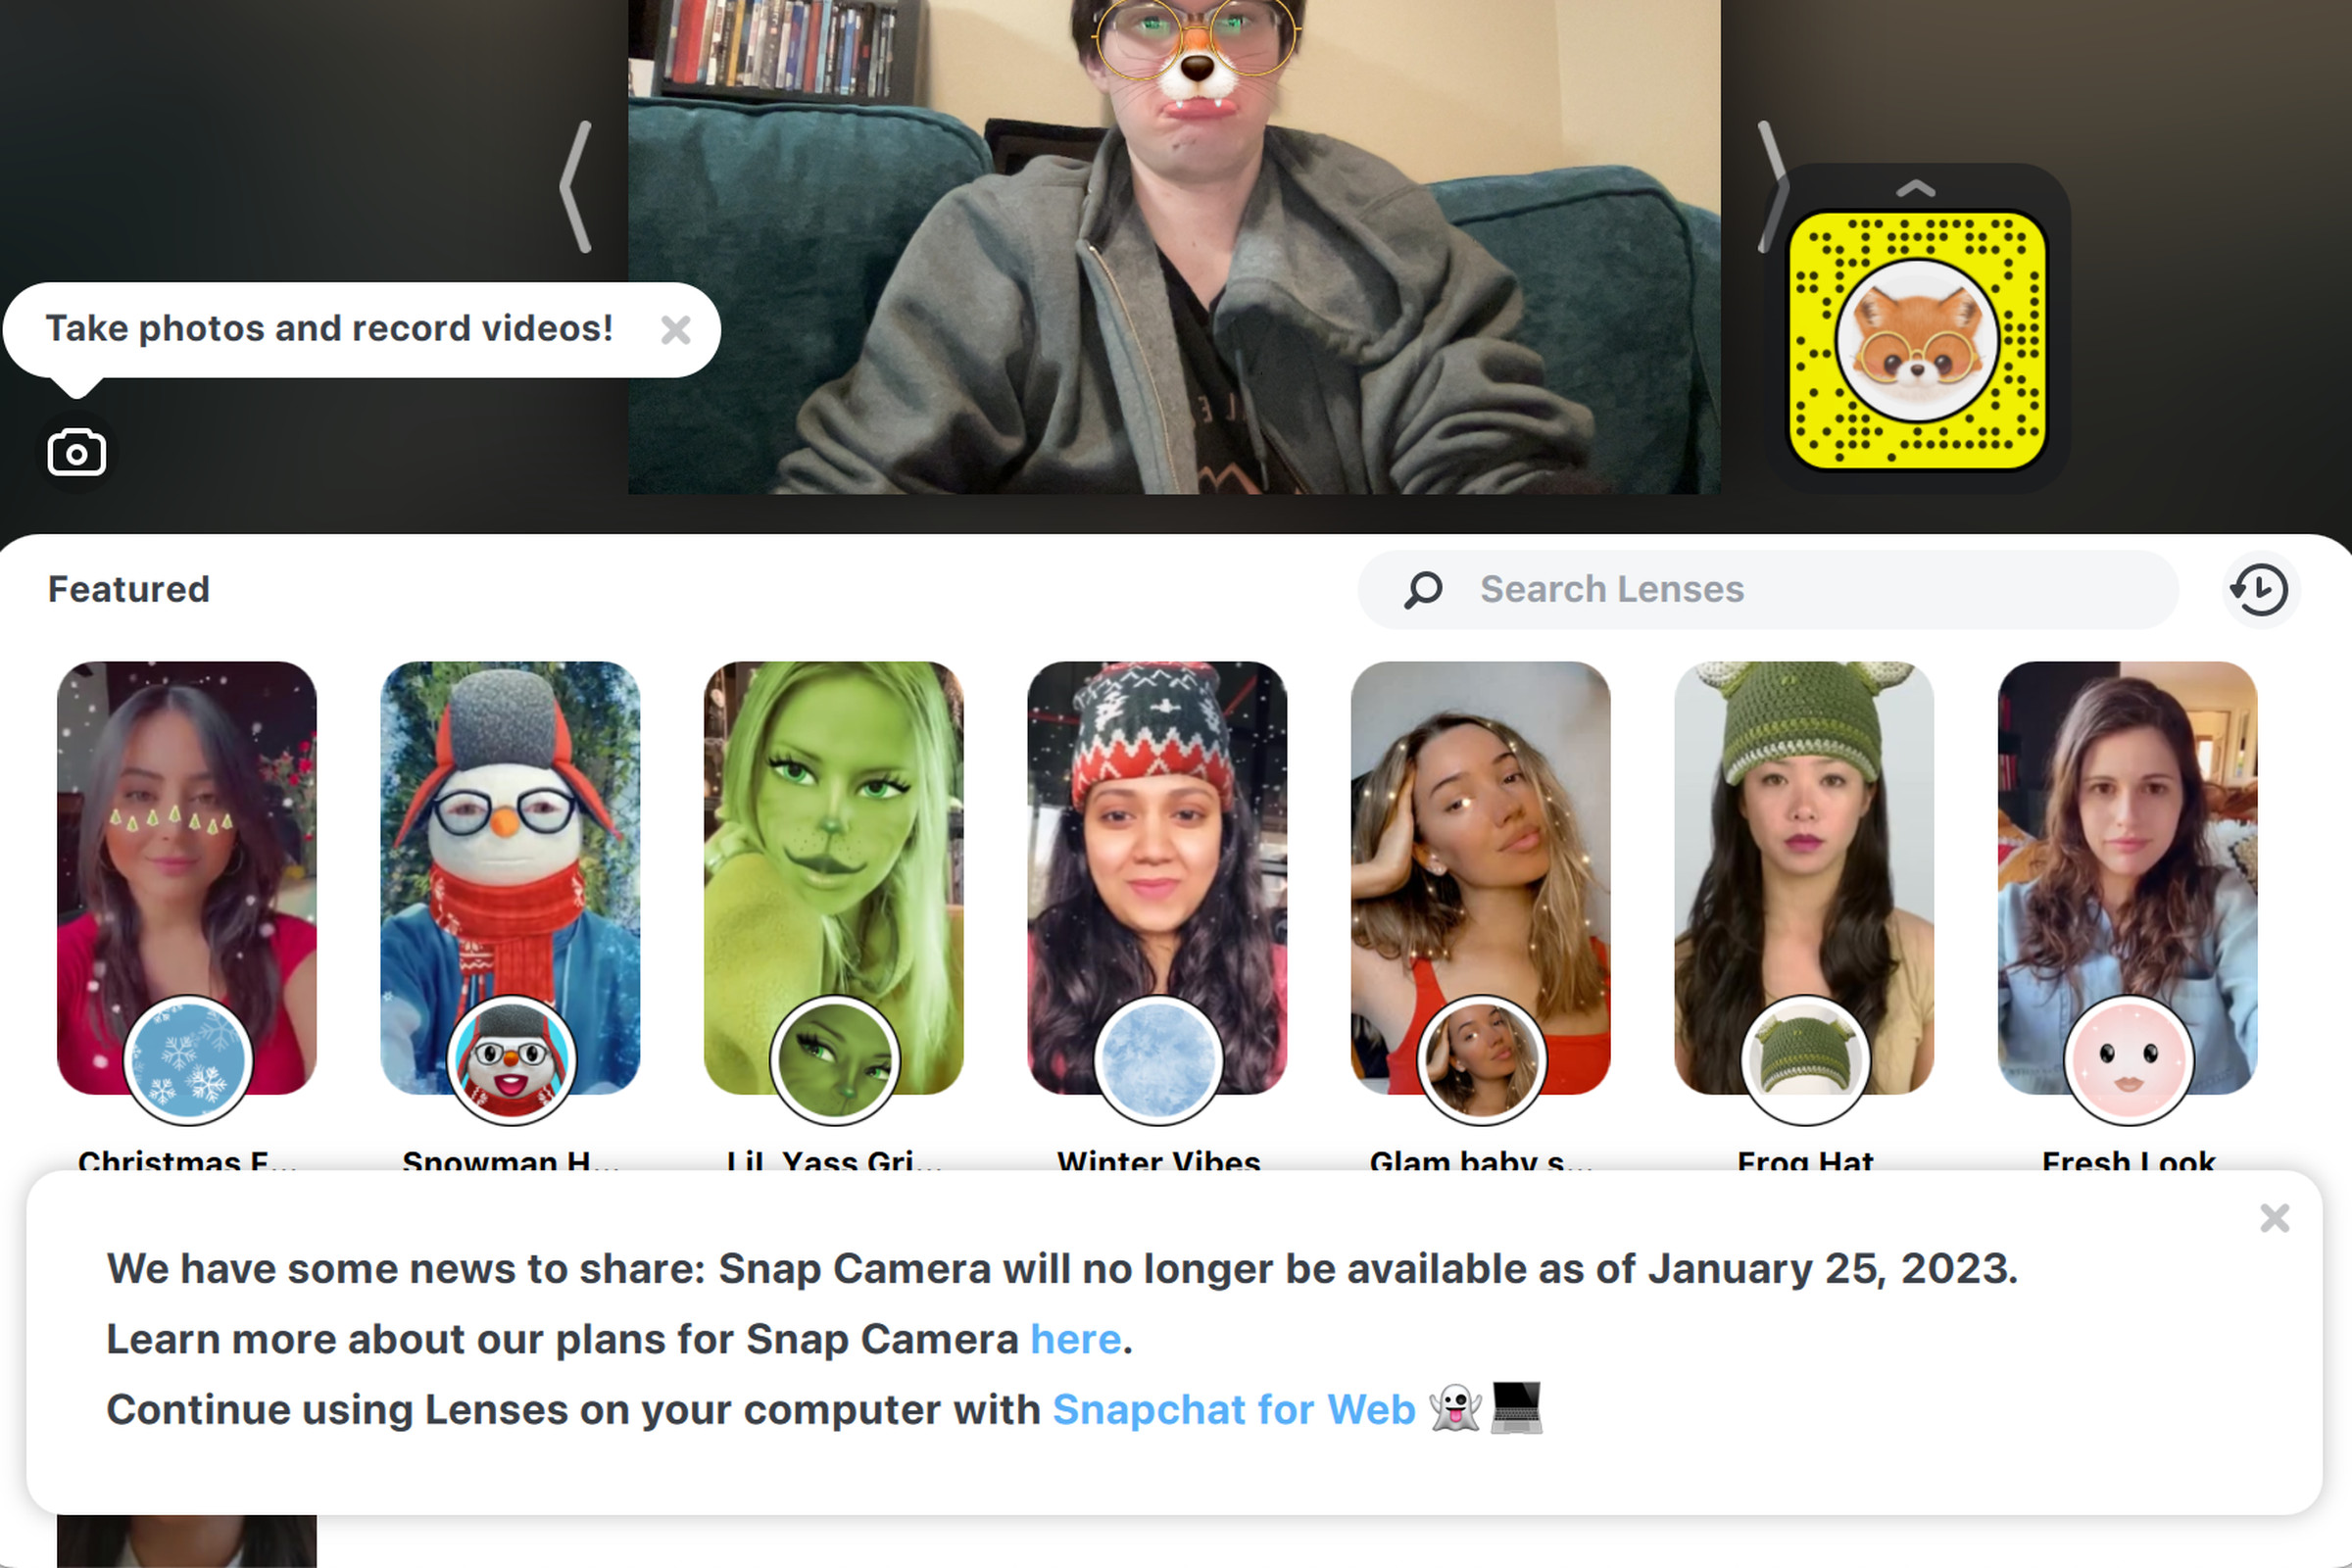 Screenshot of the Snap Camera app with an announcement reading: “We have some news to share: Snap Camera will no longer be available as of January 25, 2023. Learn more about our plans for Snap Camera here.”